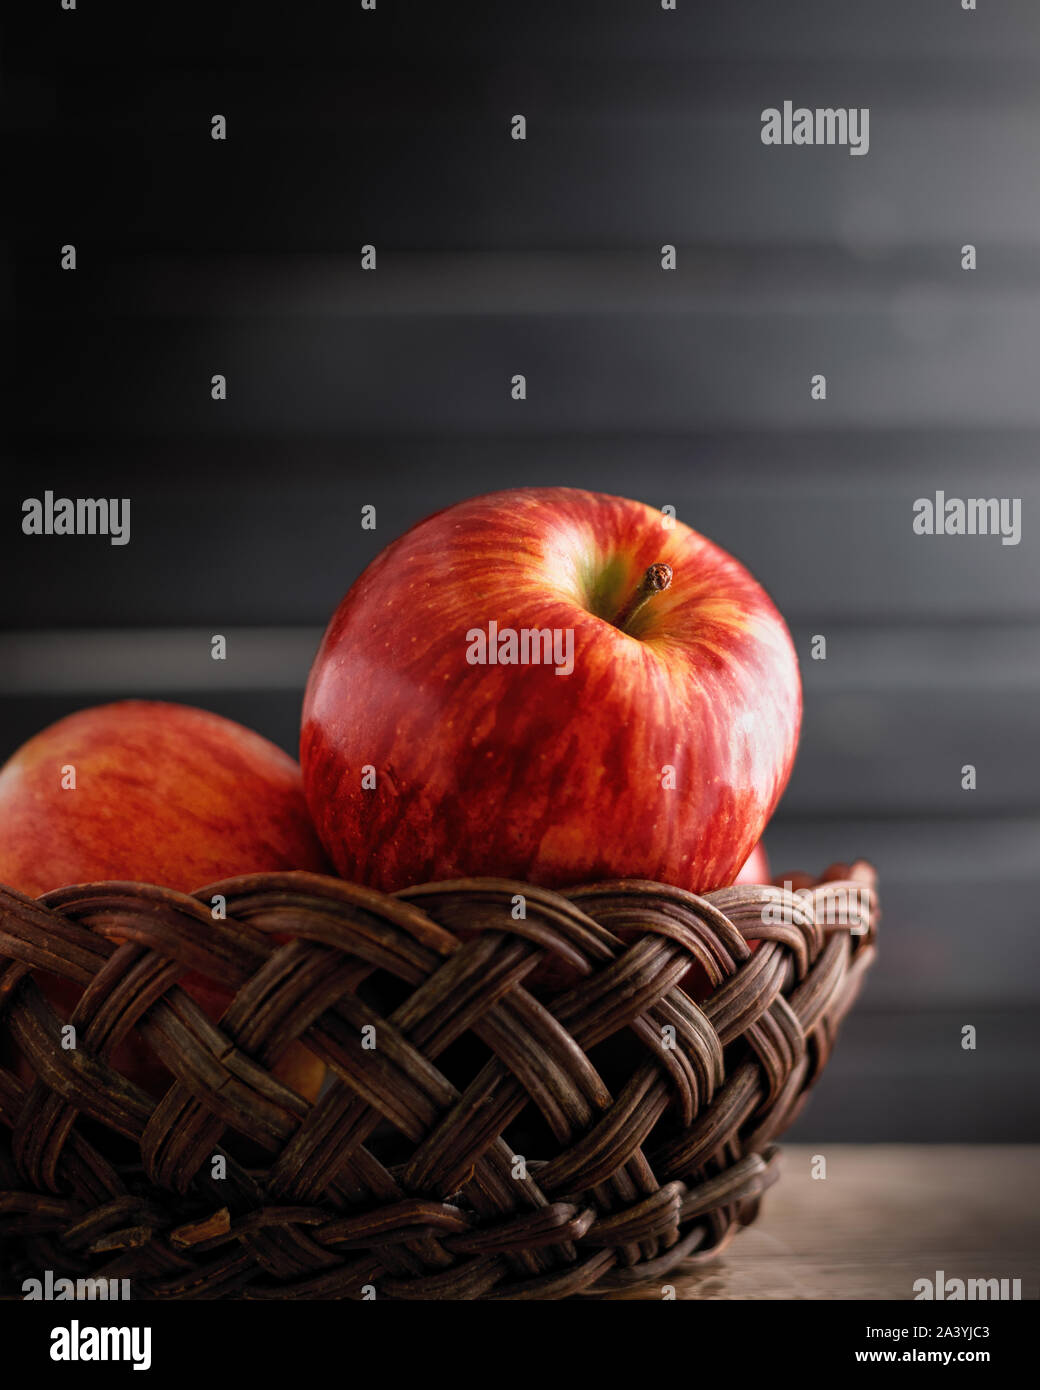 Beautiful and fresh red apples in a vine basket closeup, dark black moody background Stock Photo